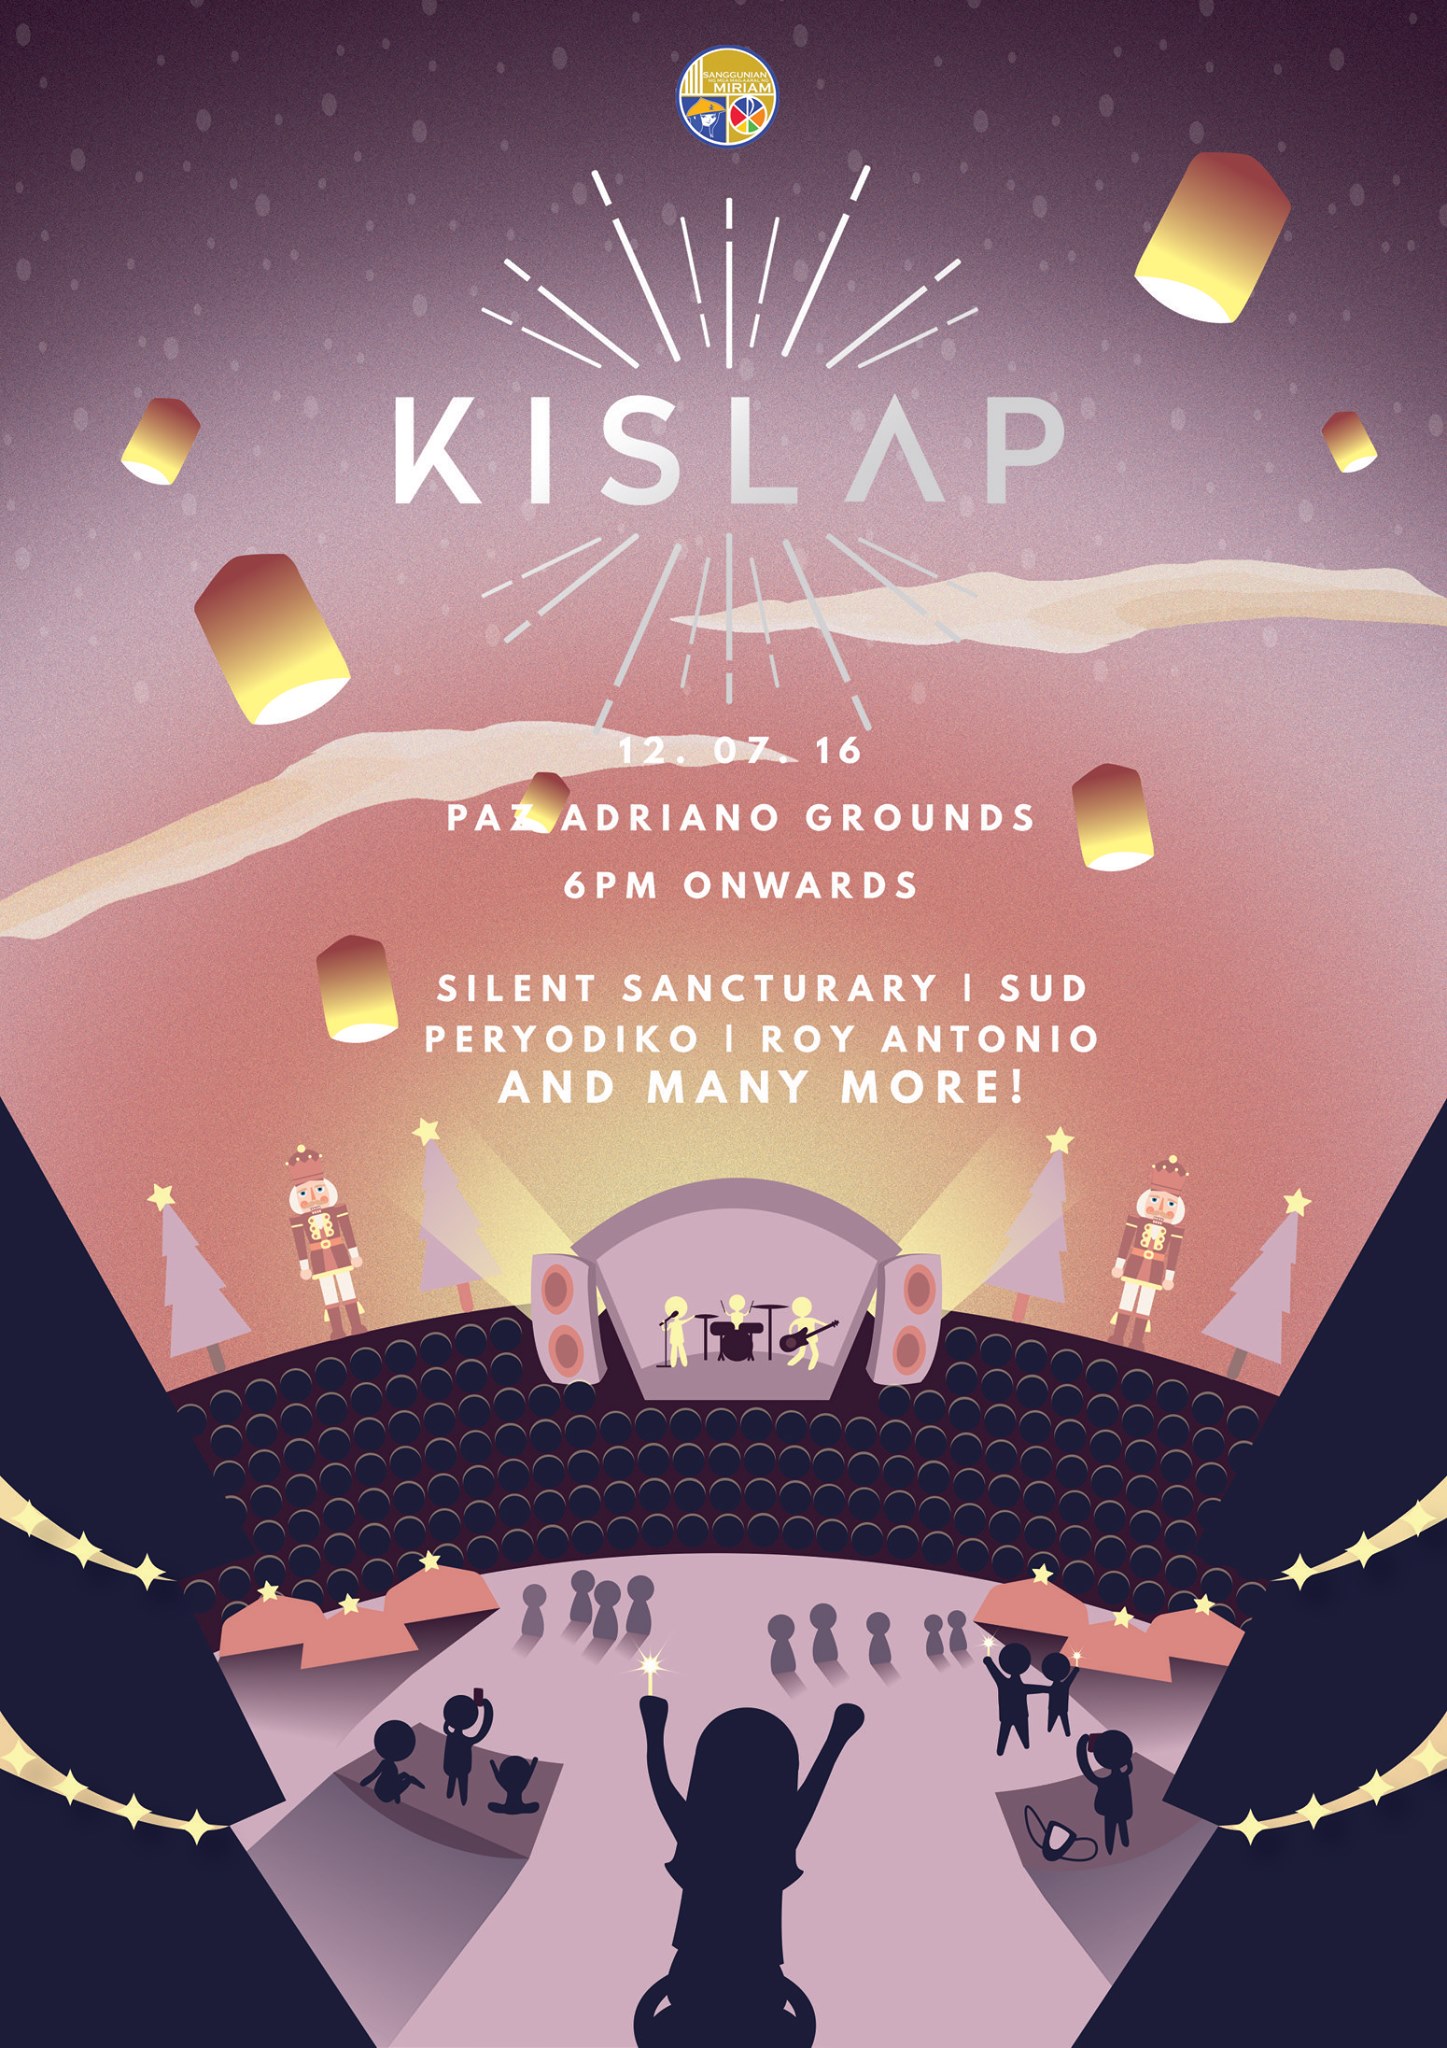 Sanggunian ng mga Mag-aaral ng Miriam Like This Page · November 19 · Edited · The most awaited date for #KISLAP2016 is finally here! Come see and enjoy Peryodiko, Roy Antonio, SUD, Silent Sanctuary, and MANY MORE this December 7, 2016 at the Paz Adriano Grounds from 6 PM onwards! We are ready to set your December vibes ablaze THIS EVENT IS OPEN TO OUTSIDERS Illustration by: Leila Alibudbud Edited by: Coleen Ramos